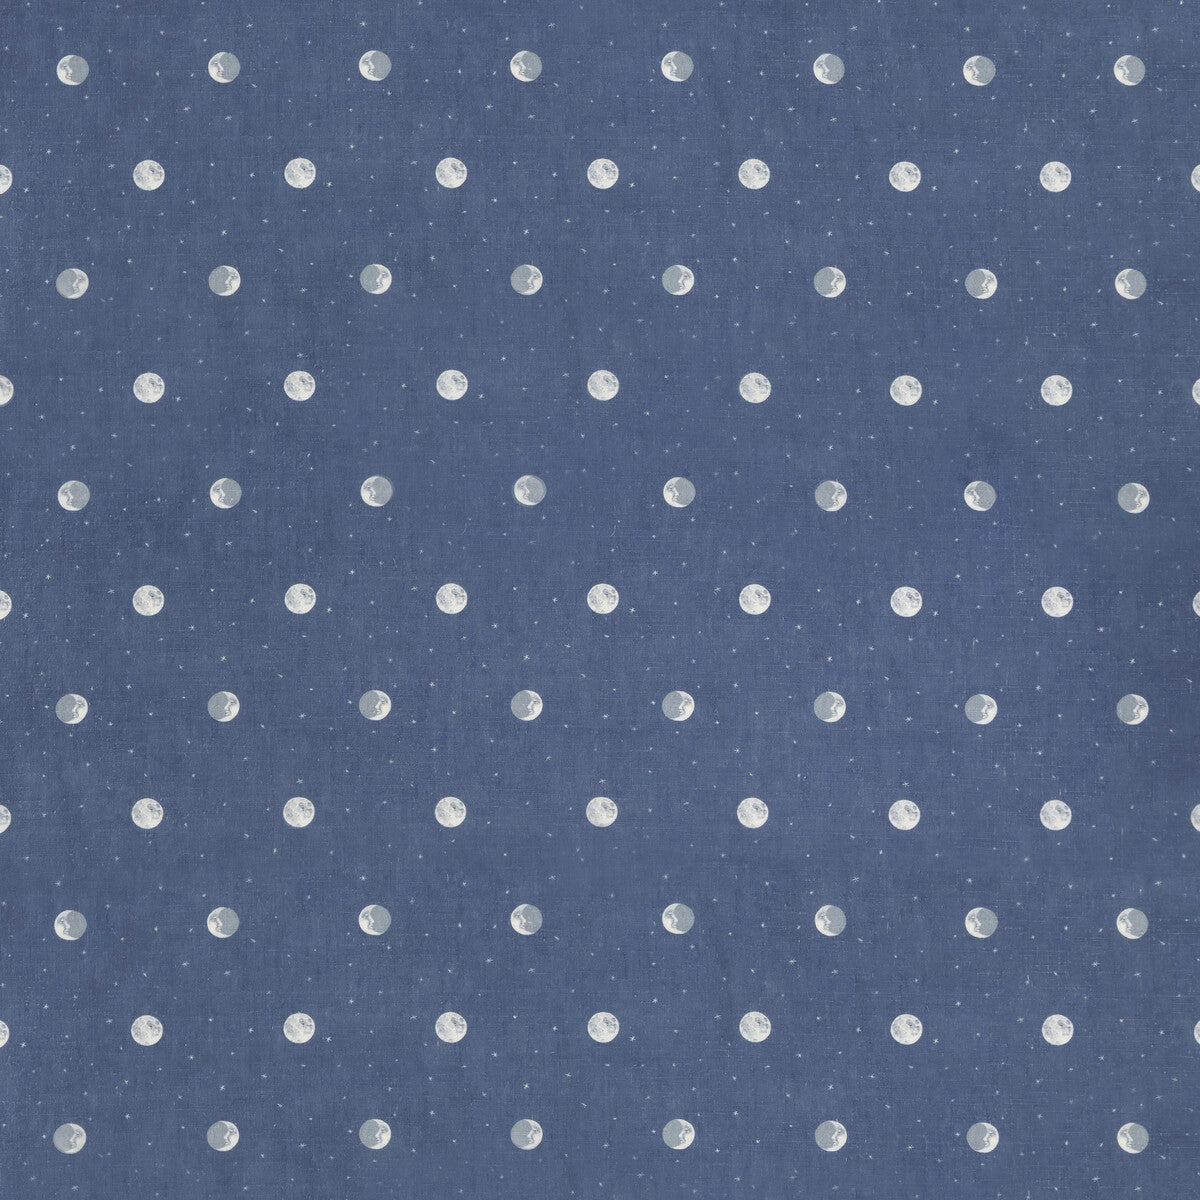 Over The Moon fabric in denim color - pattern AM100320.5.0 - by Kravet Couture in the Andrew Martin Kit Kemp collection